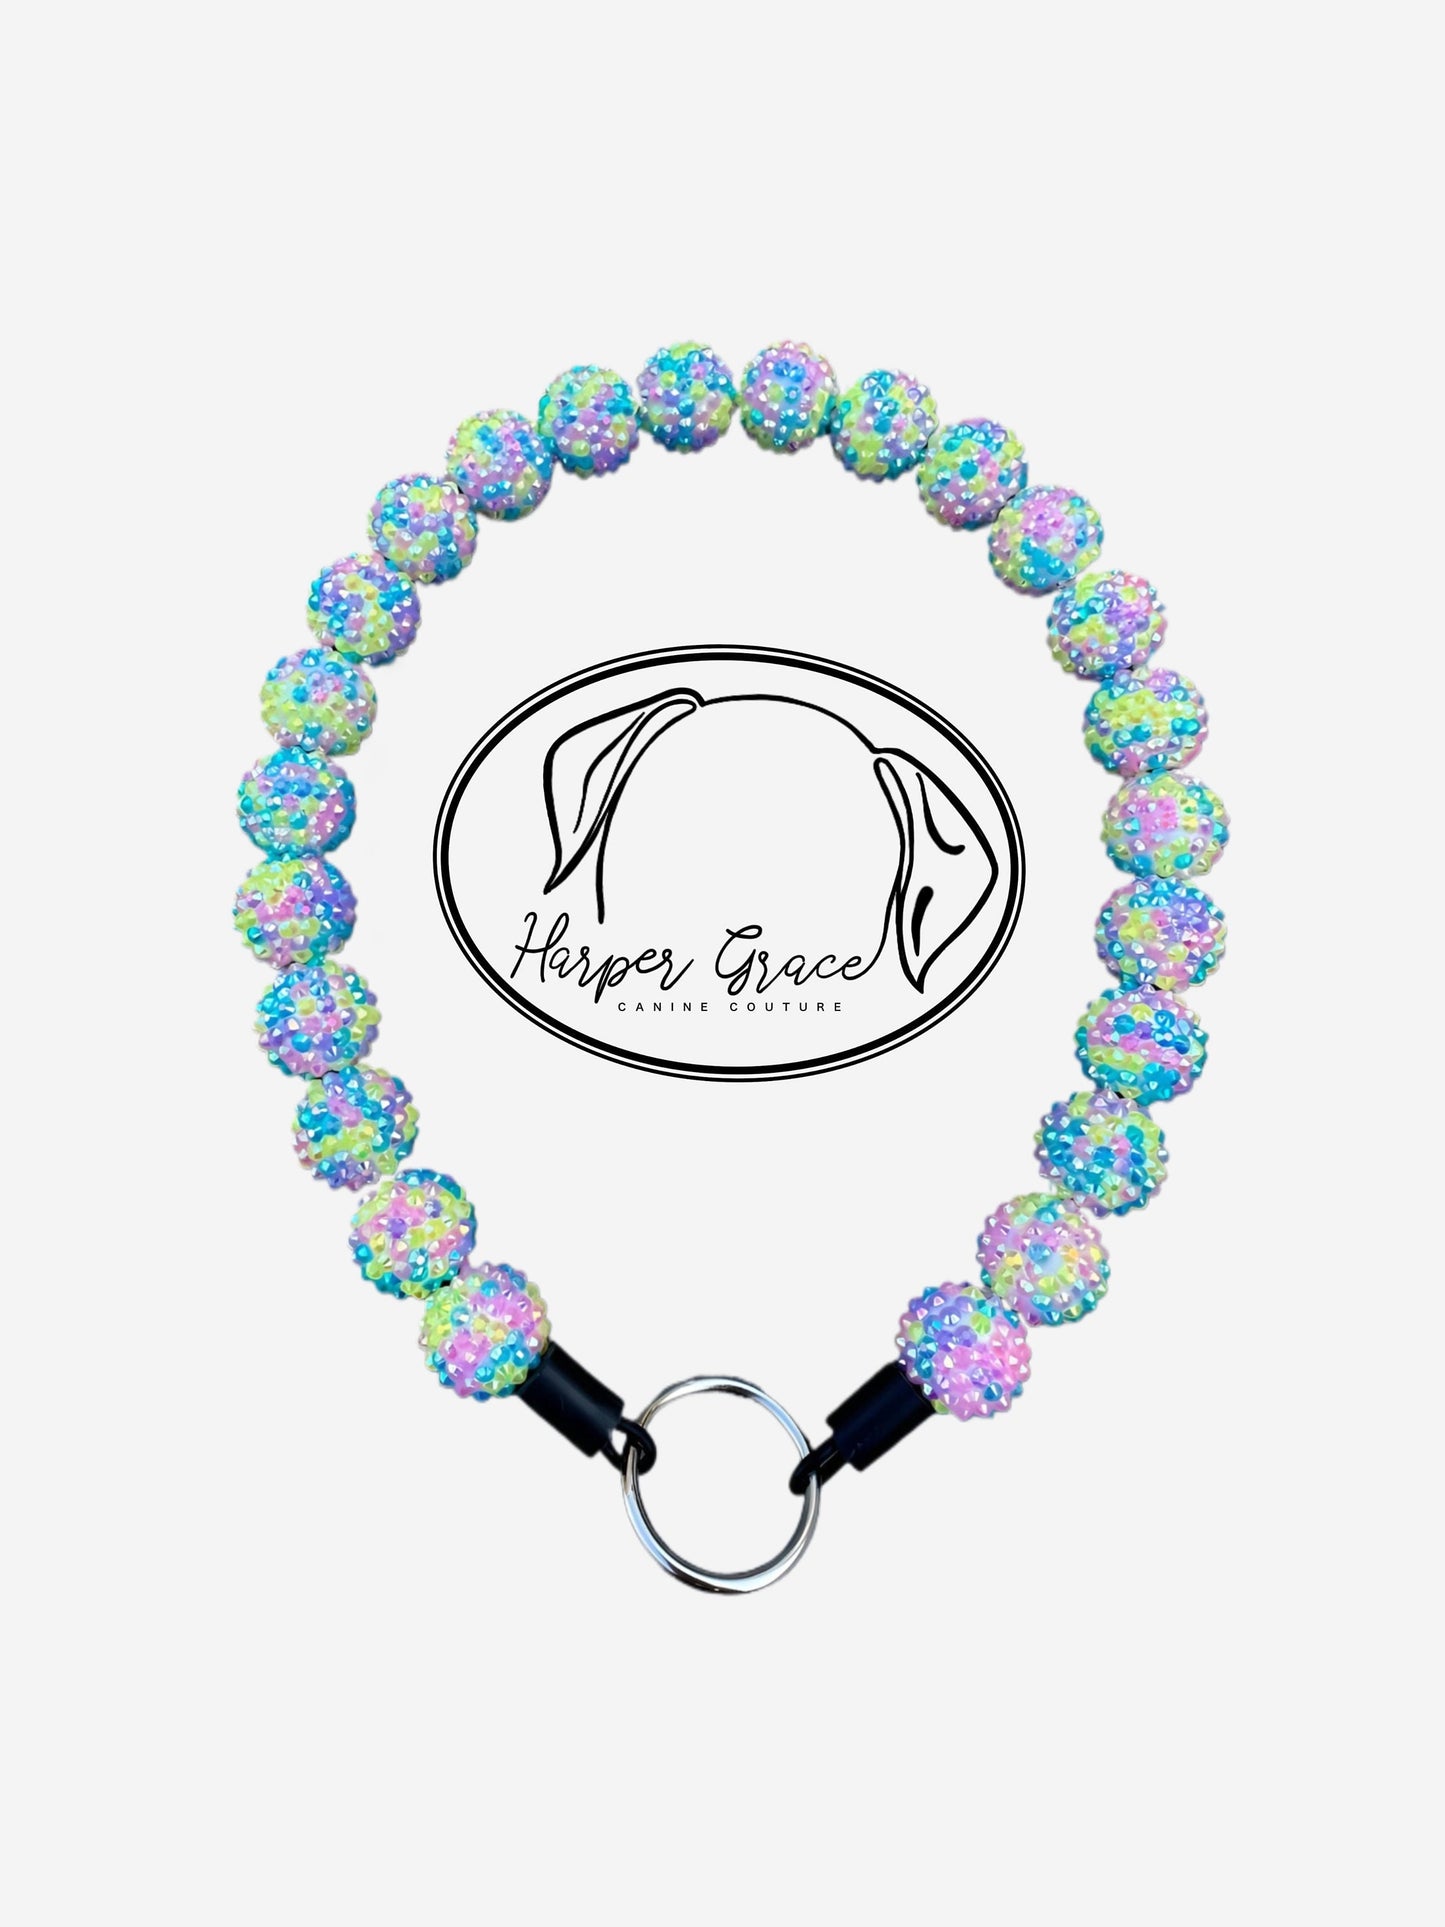 Fur-ever in Lover Hues Beaded Dog Collar